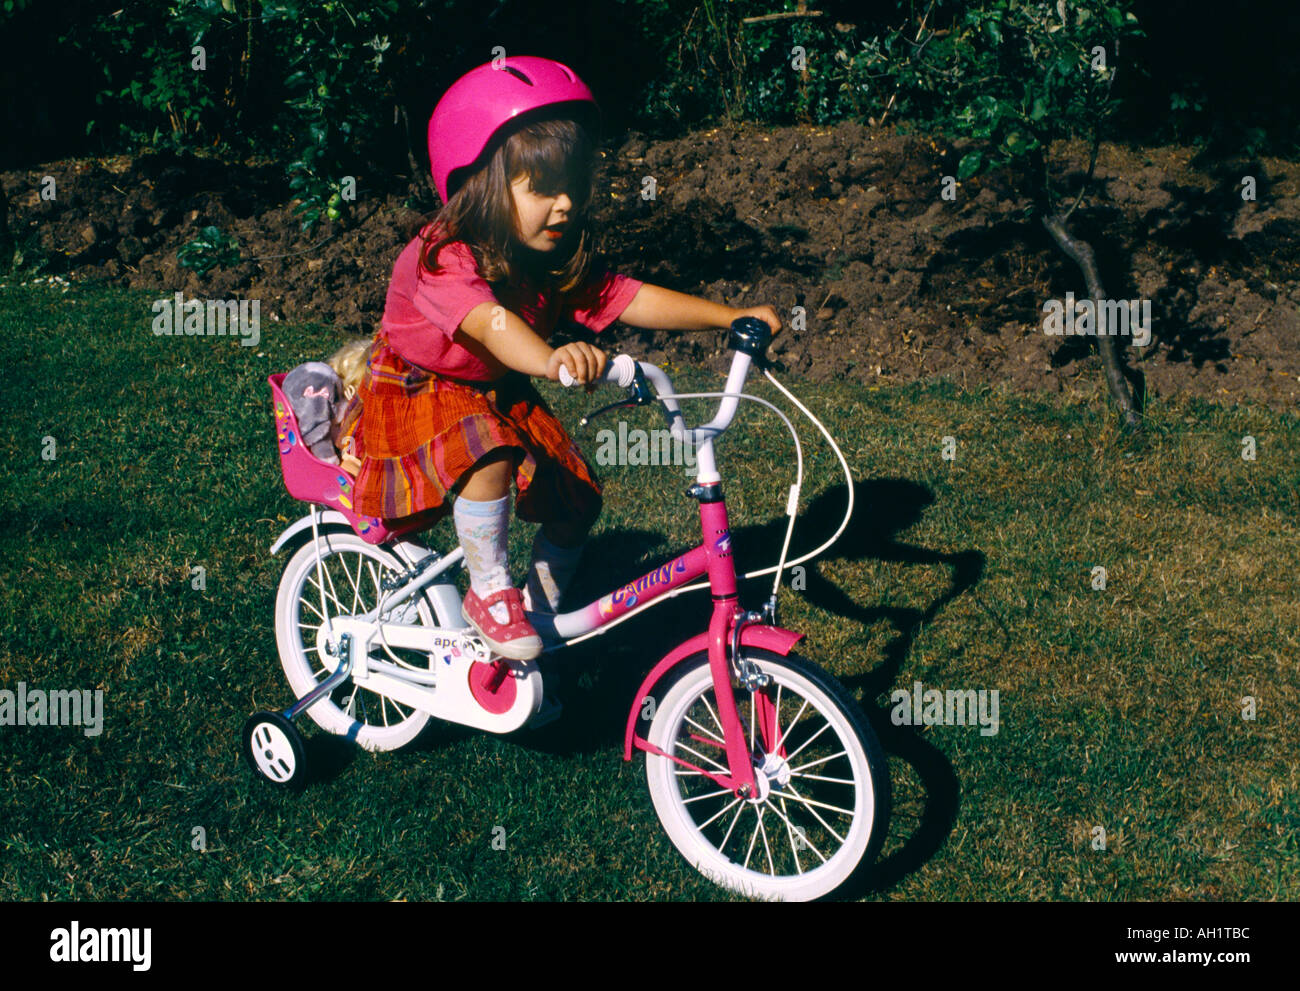 Child Riding Bike With Stabilisers And Cycle Helmet Stock Photo